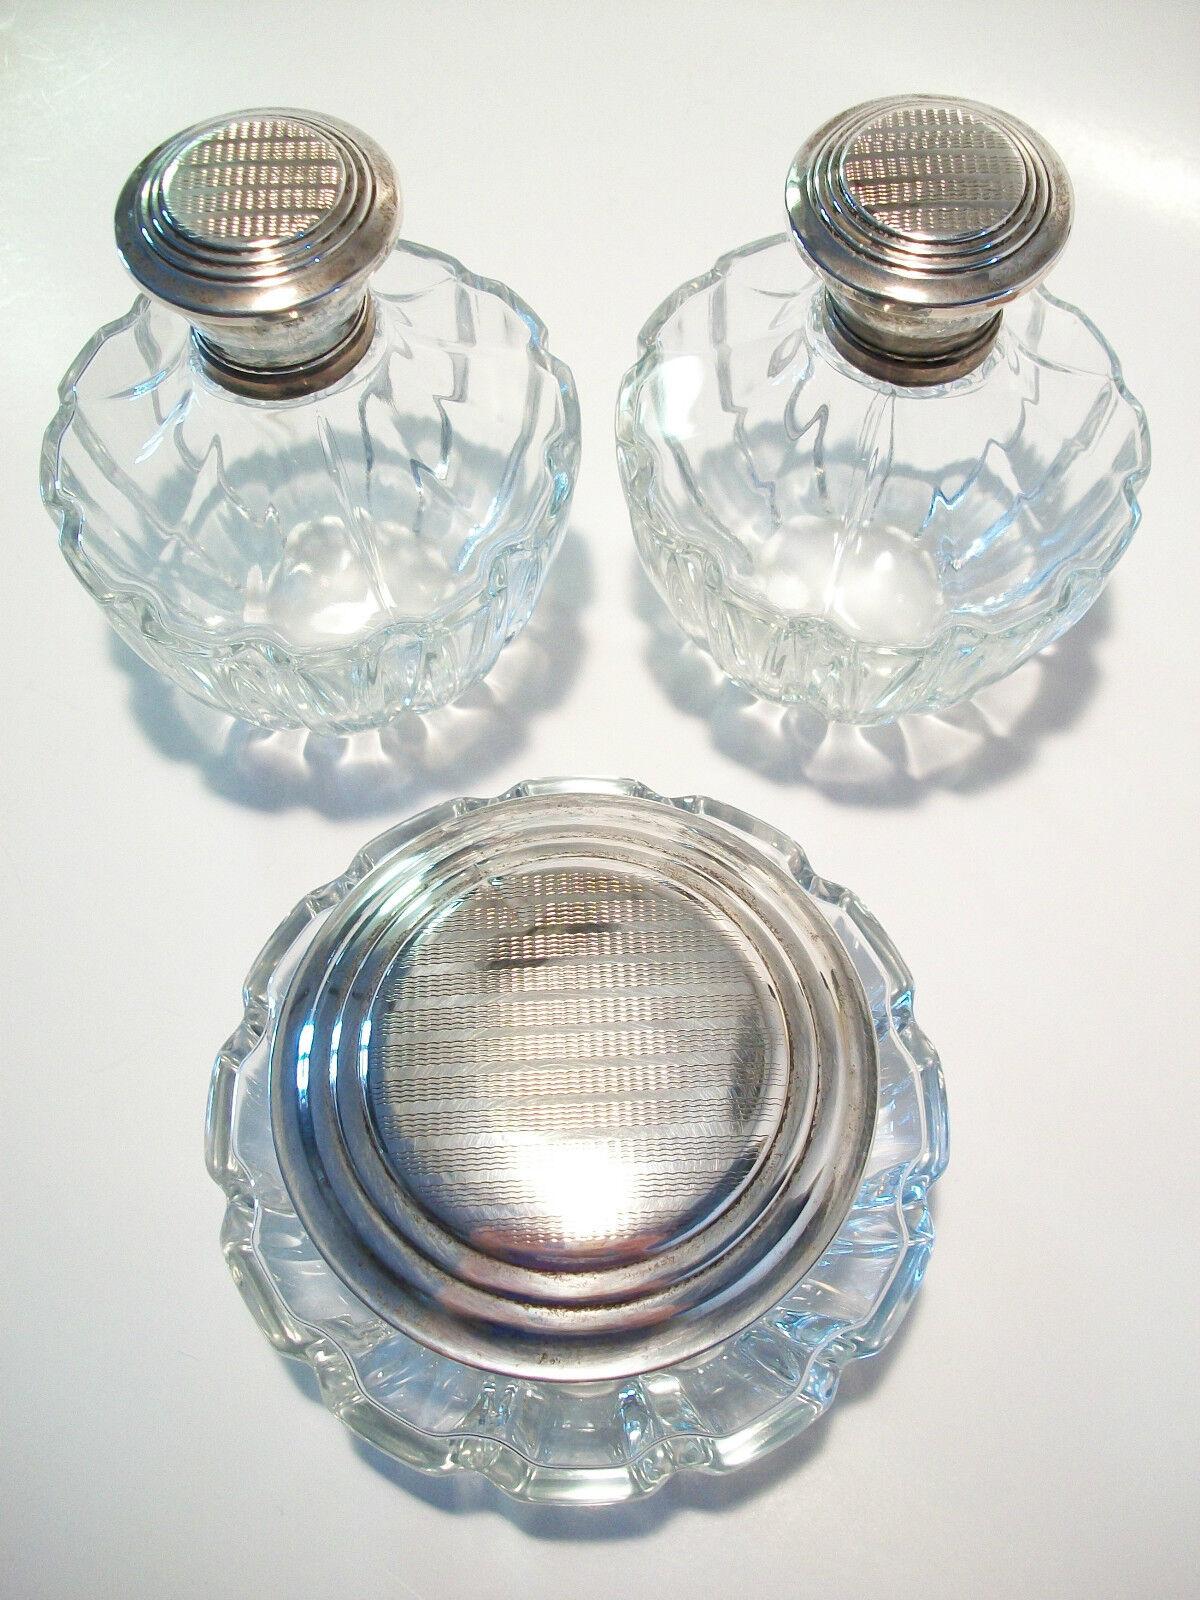 Vintage Three Piece Vanity Set - Silver Plate & Crystal - Early 20th Century For Sale 1